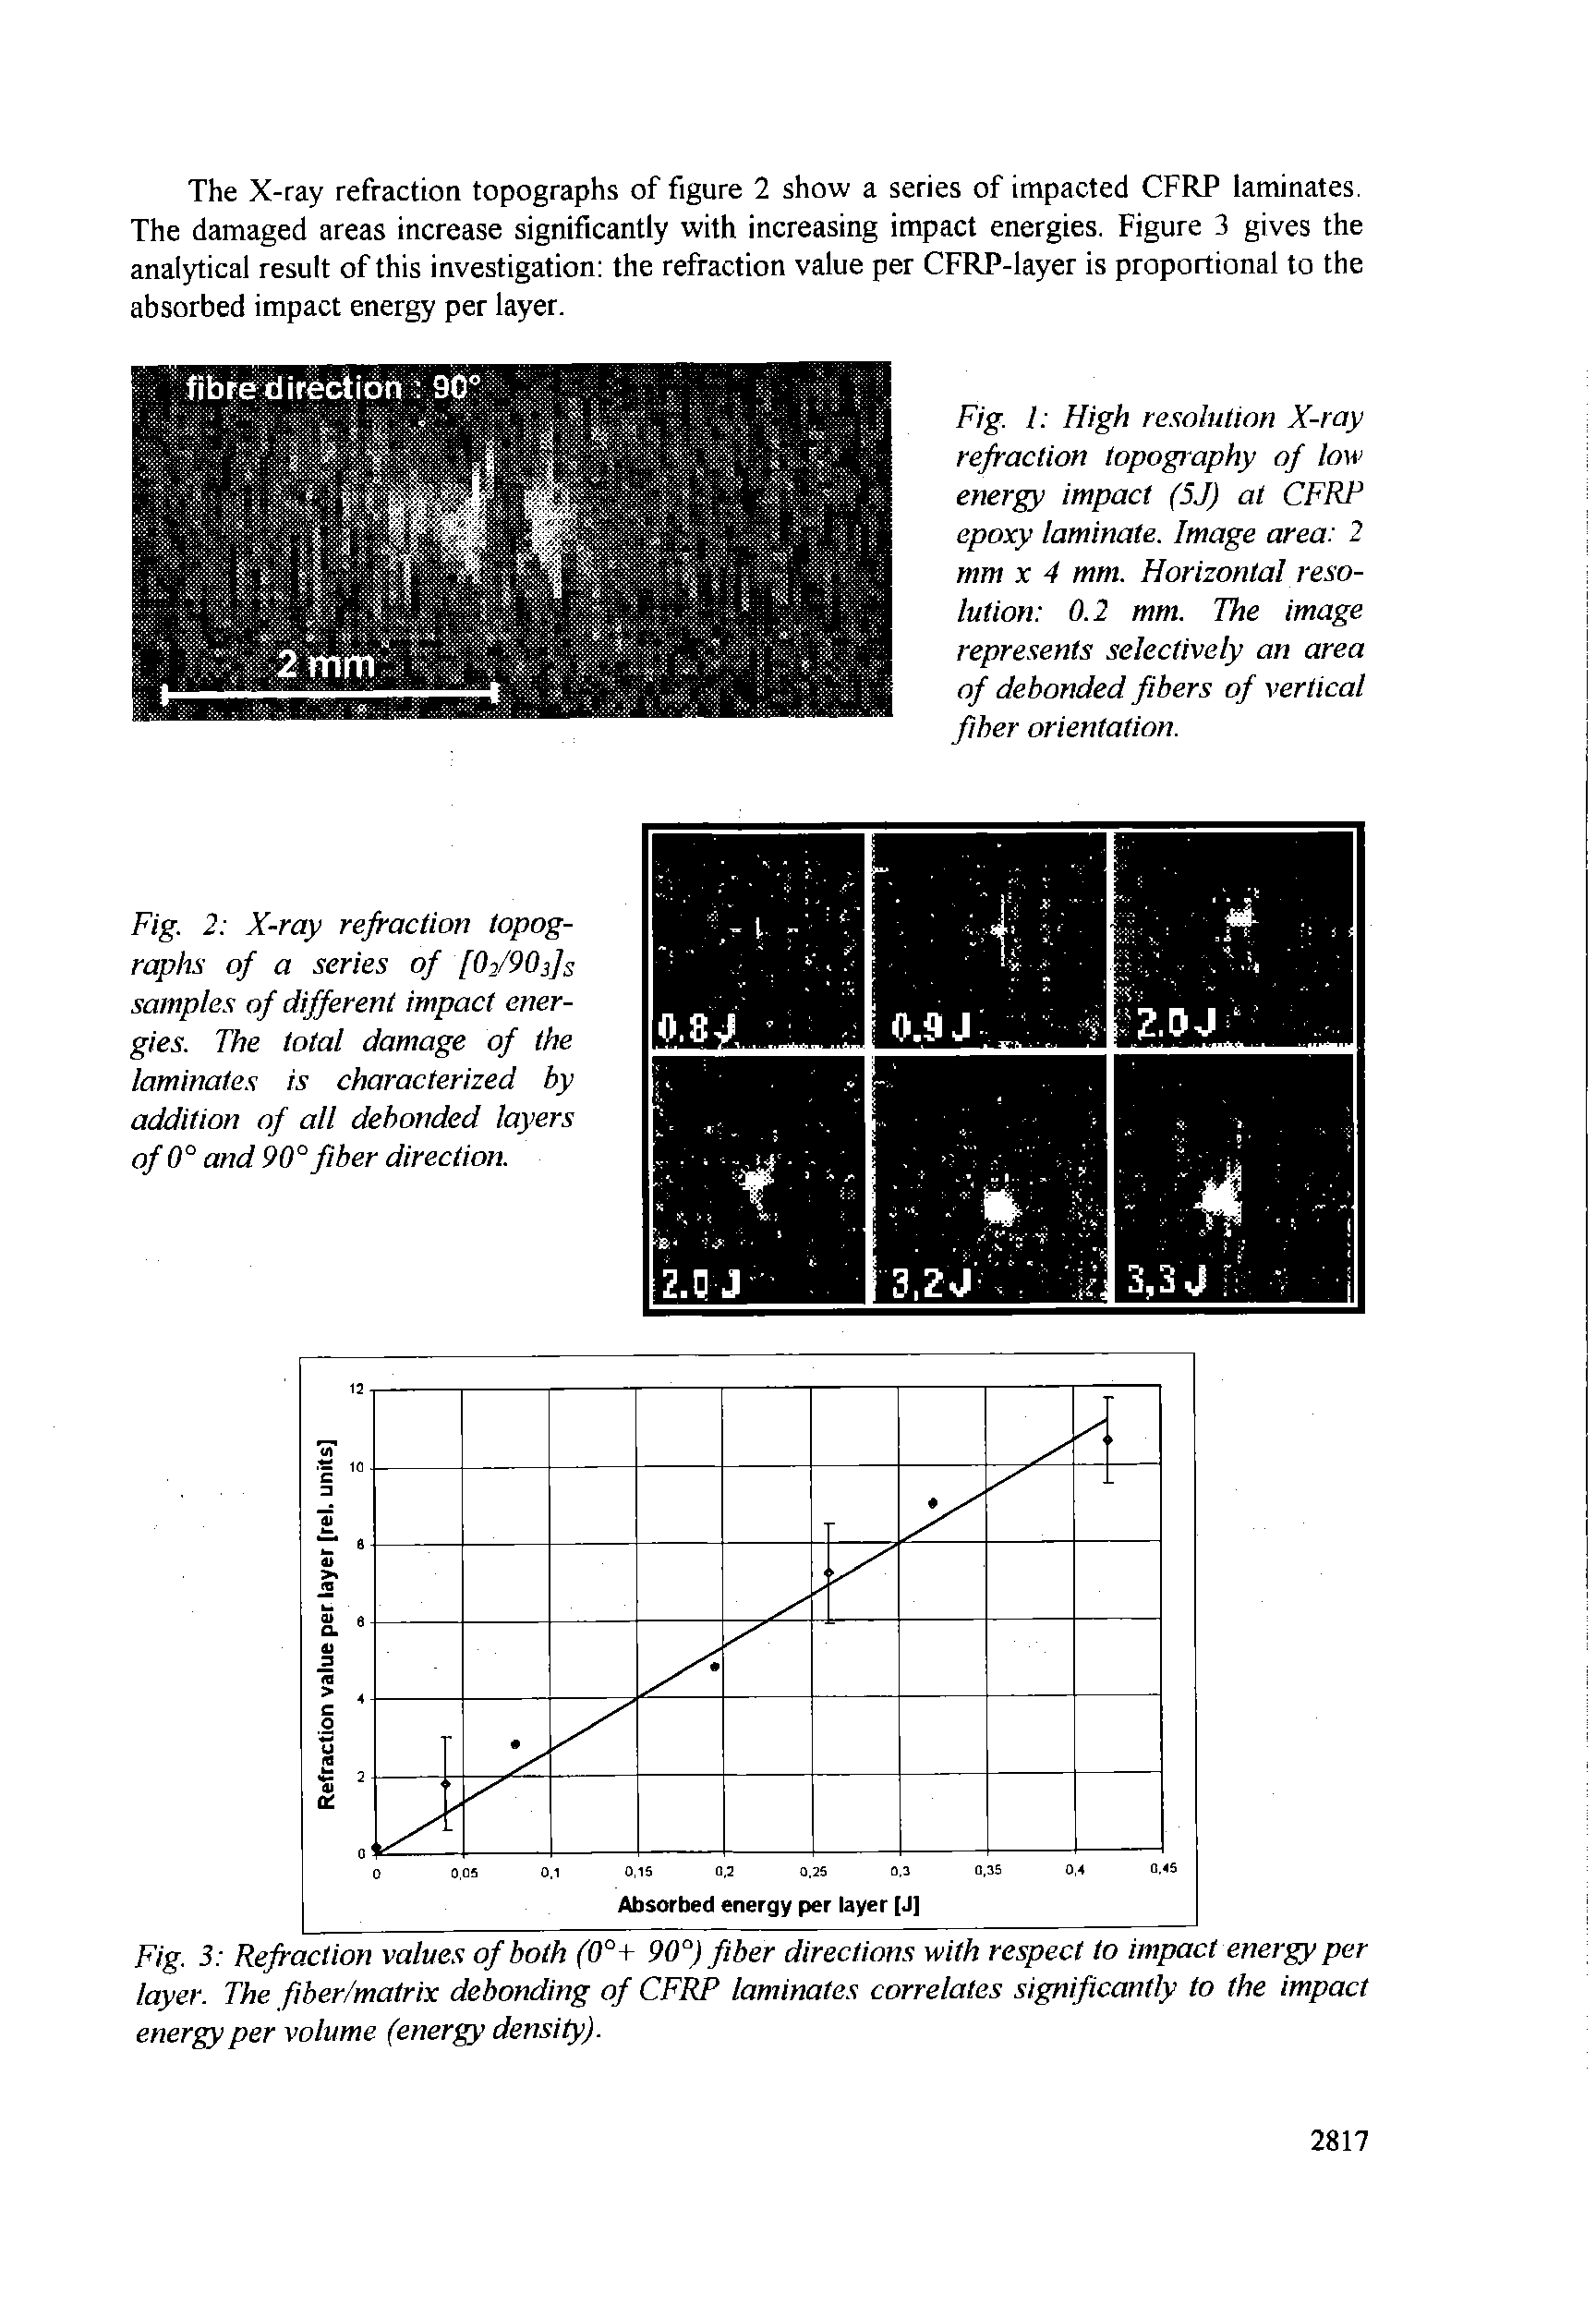 Fig. 2 X-ray refraction topographs of a series of /OyPOj/s samples of different impact energies. The total damage of the laminates is characterized by addition of all debonded layers of0° and 90° fiber direction.